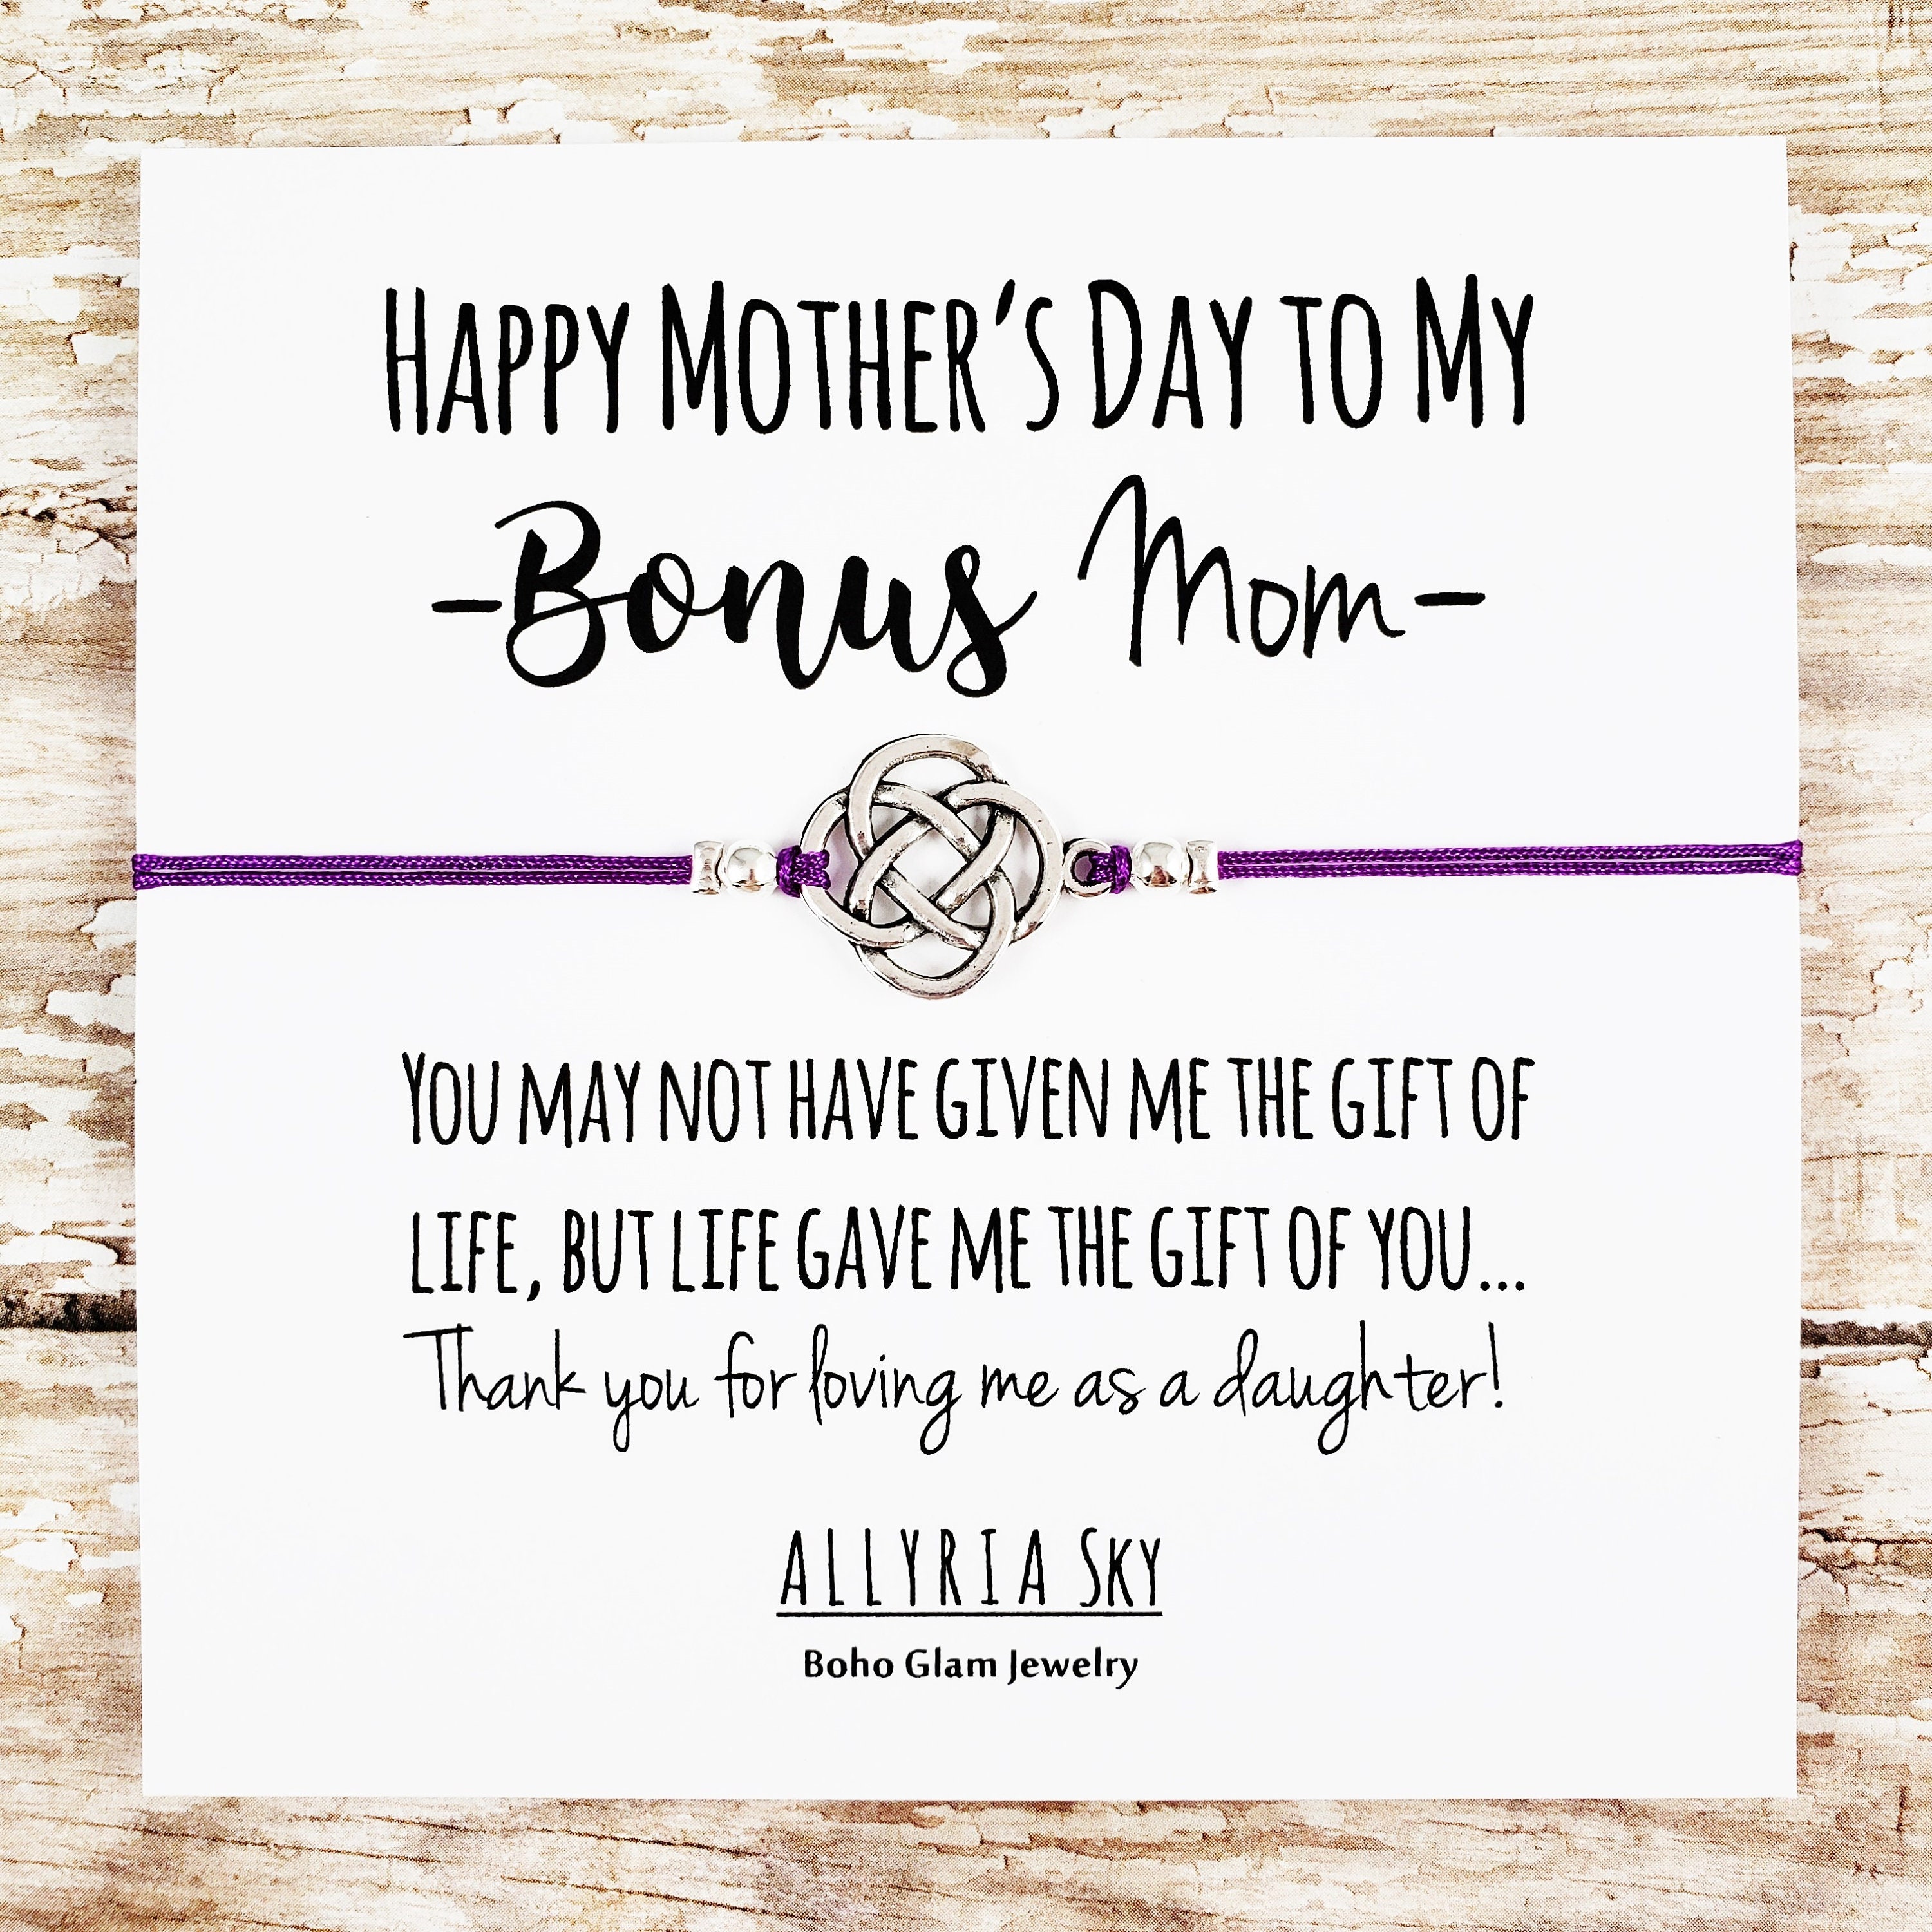 Mothers Day Gifts from Daughter Son,Gifts for Mom,Mom Gifts,Birthday  Christmas Gifts for Mom Her Bonus Mom Mother,Best Candles Gifts for Mom